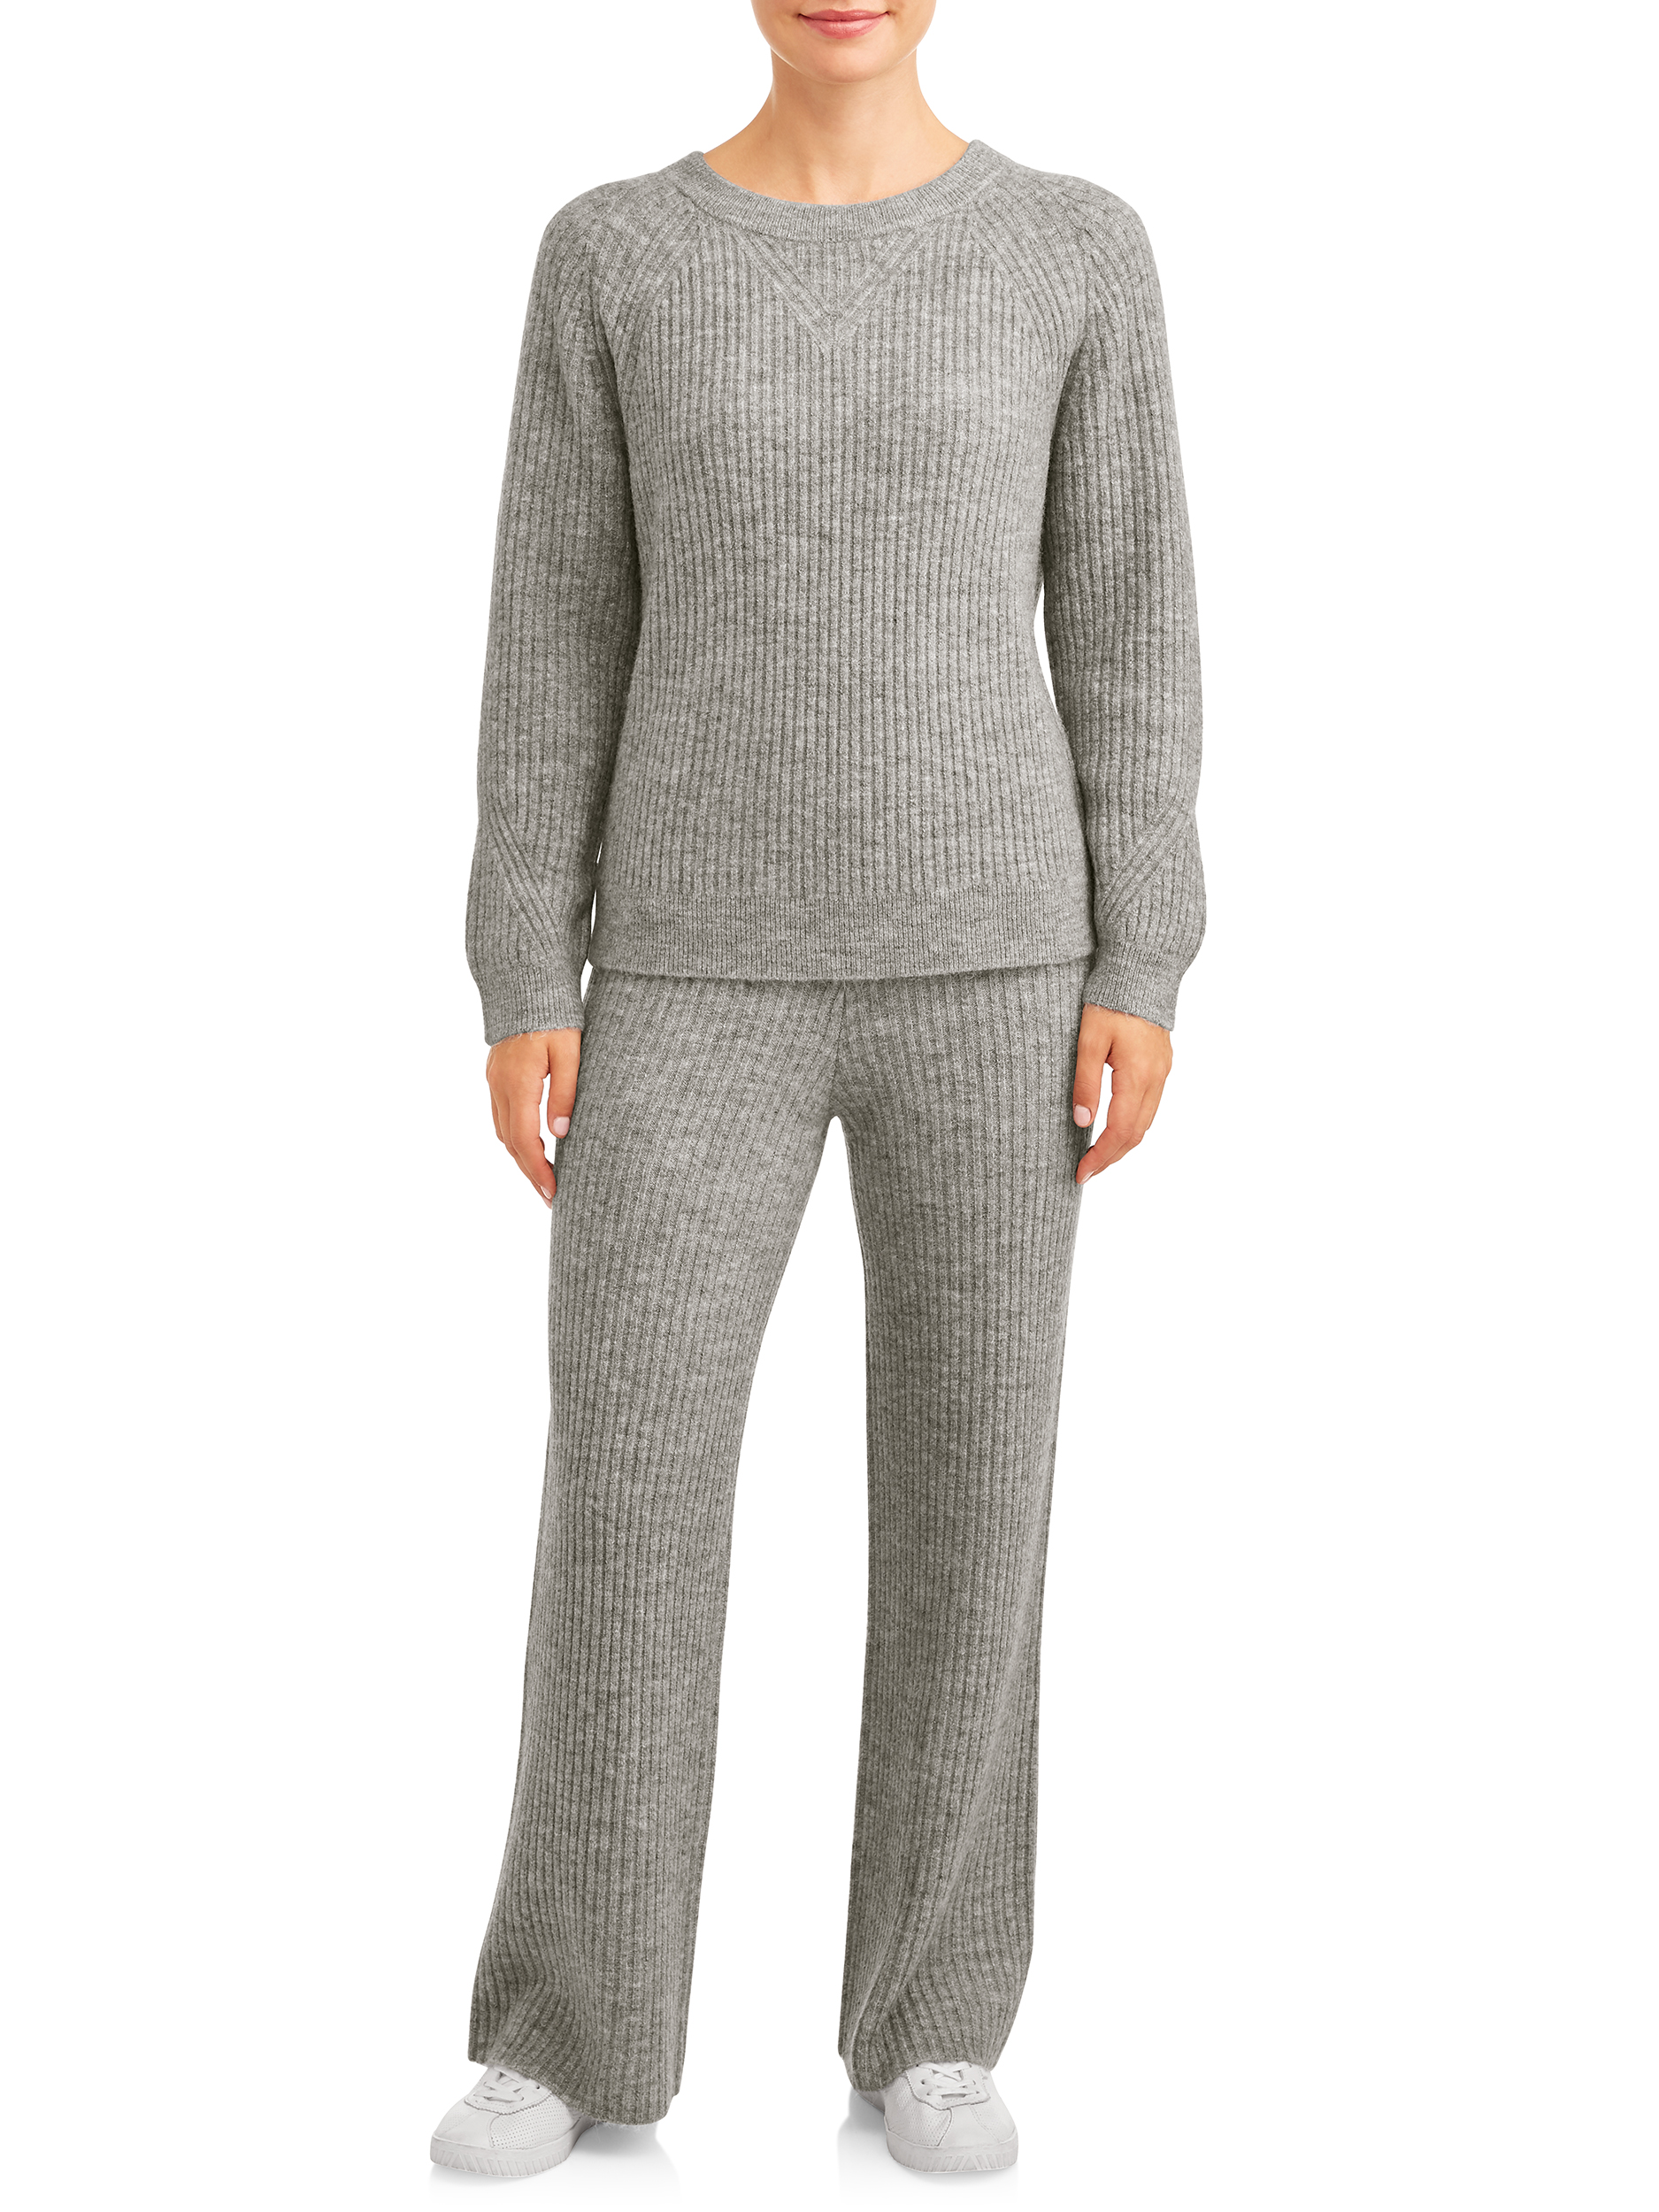 Time and Tru Cozy Knit Pant Women's - image 3 of 5